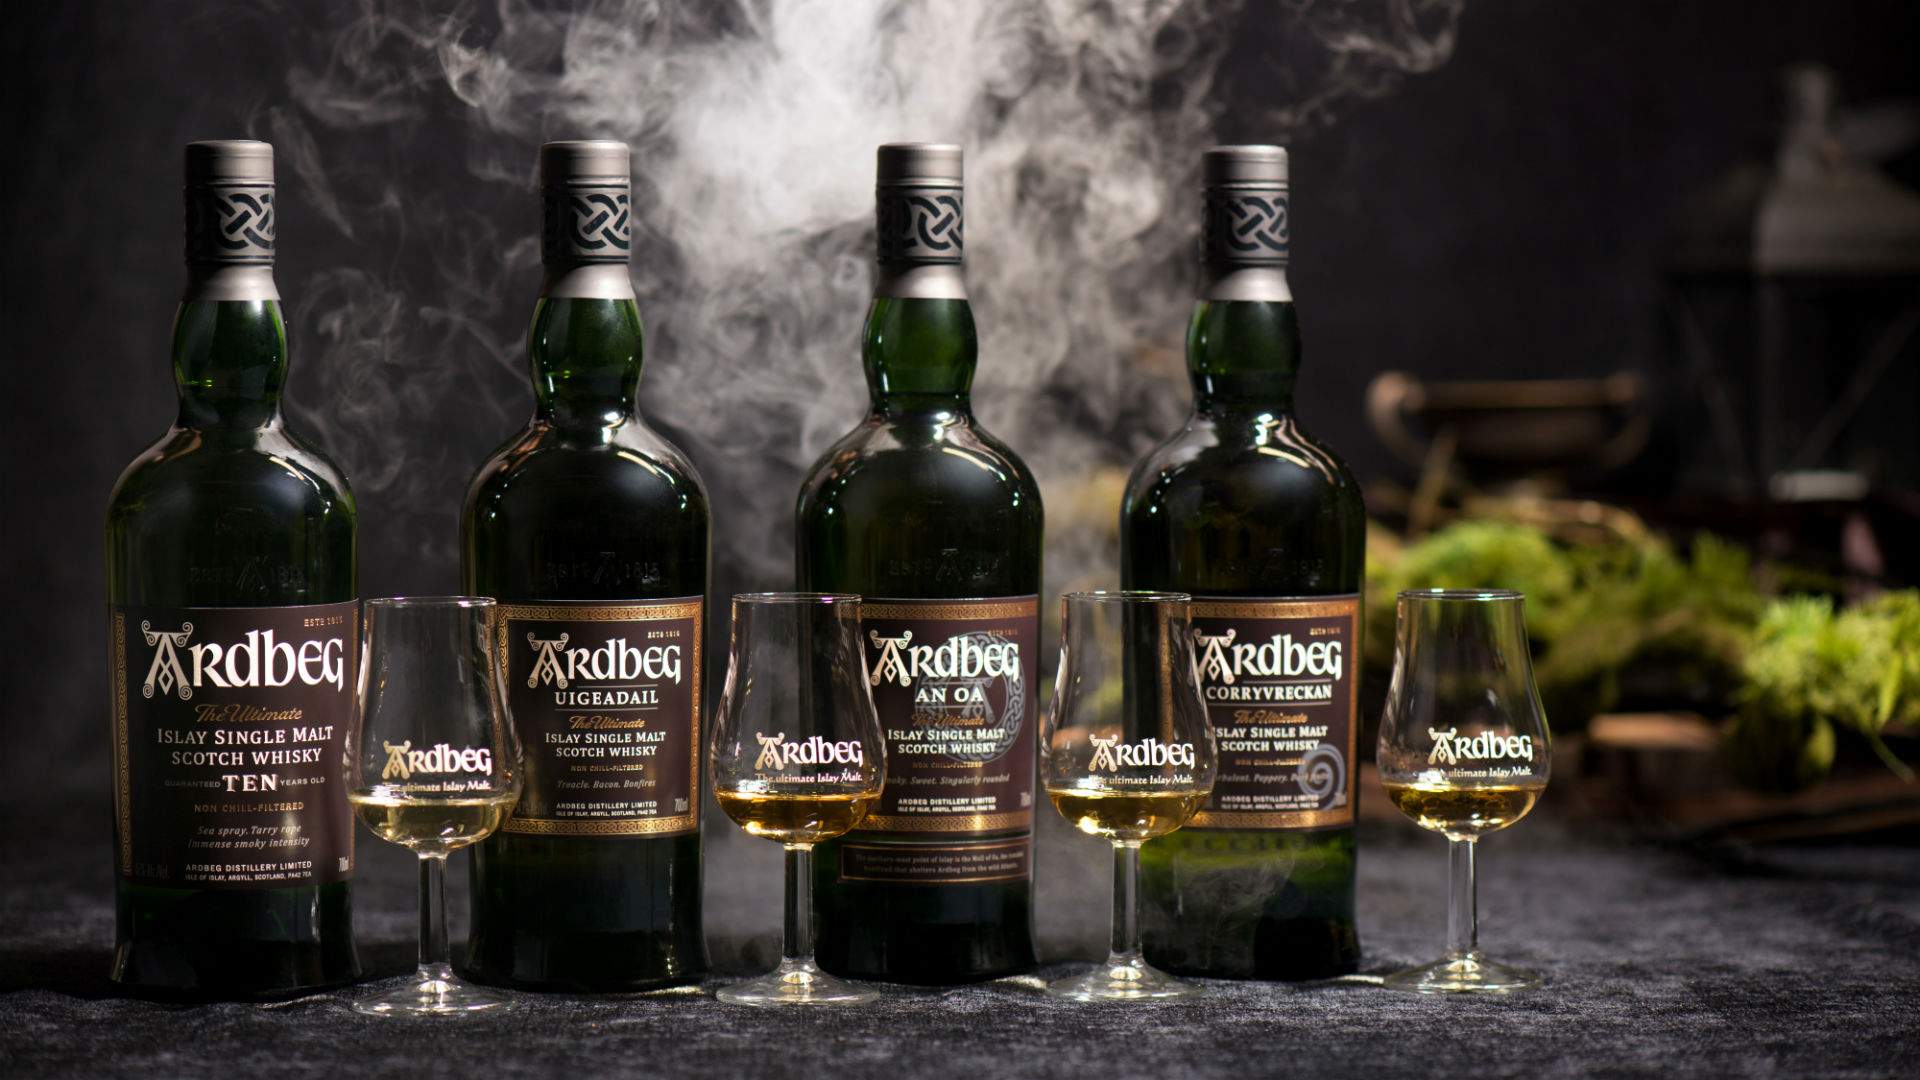 The Ardbeg Smokehouse At Websters Sydney Concrete Playground